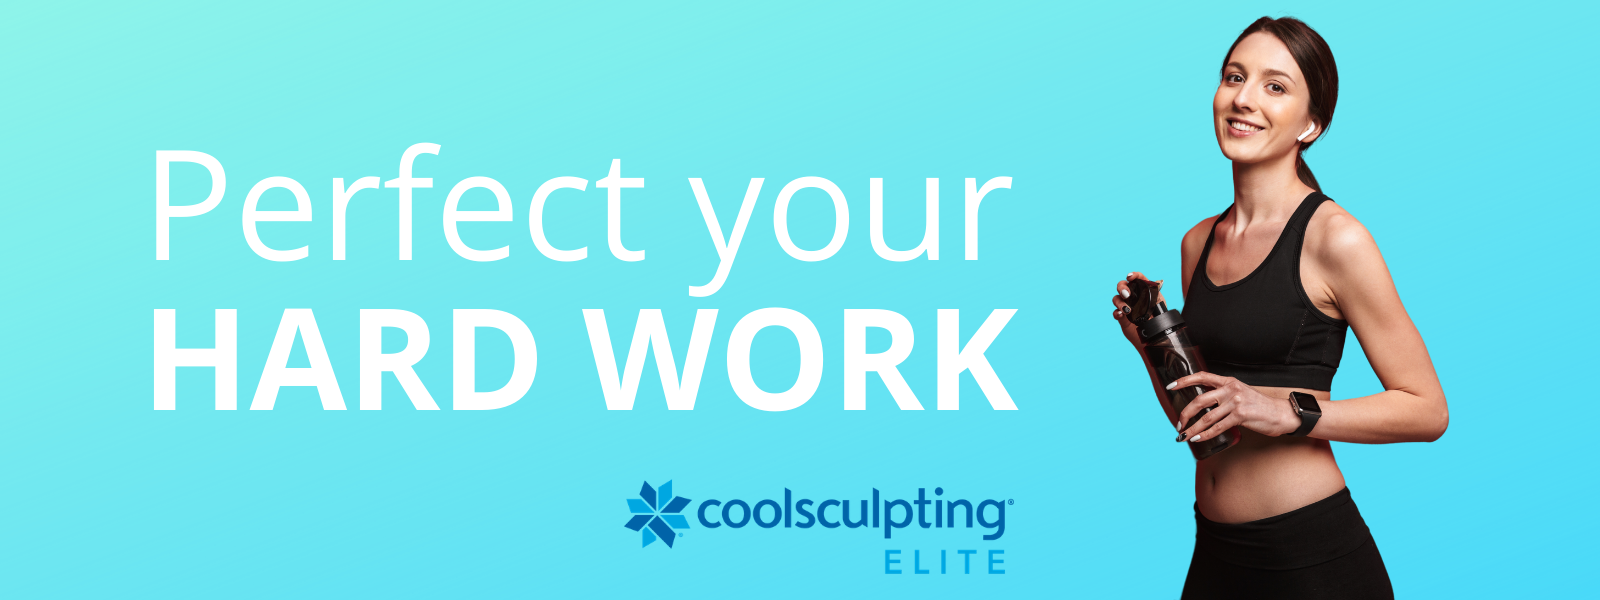 Perfect your hard work with CoolSculpting Elite at Revive Medical Spa in Fayetteville Arkansas